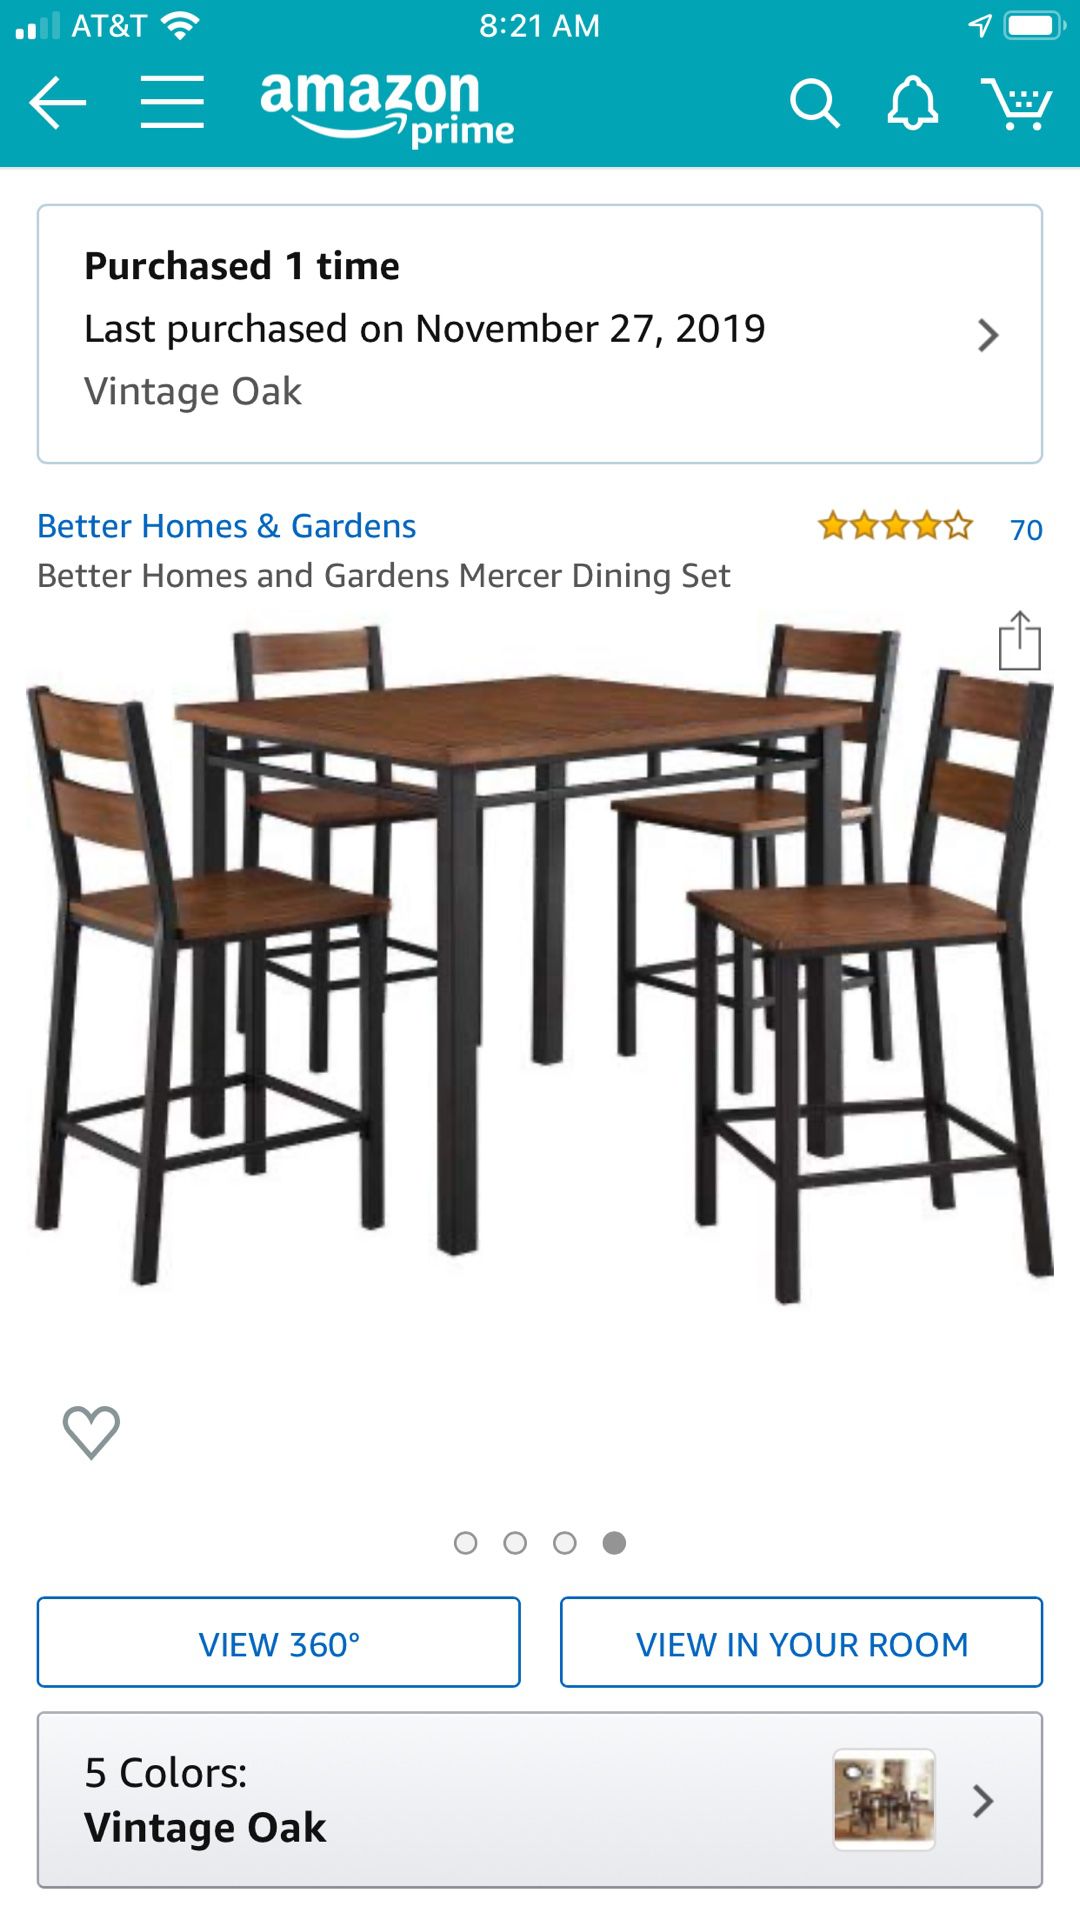 Better Homes dining table